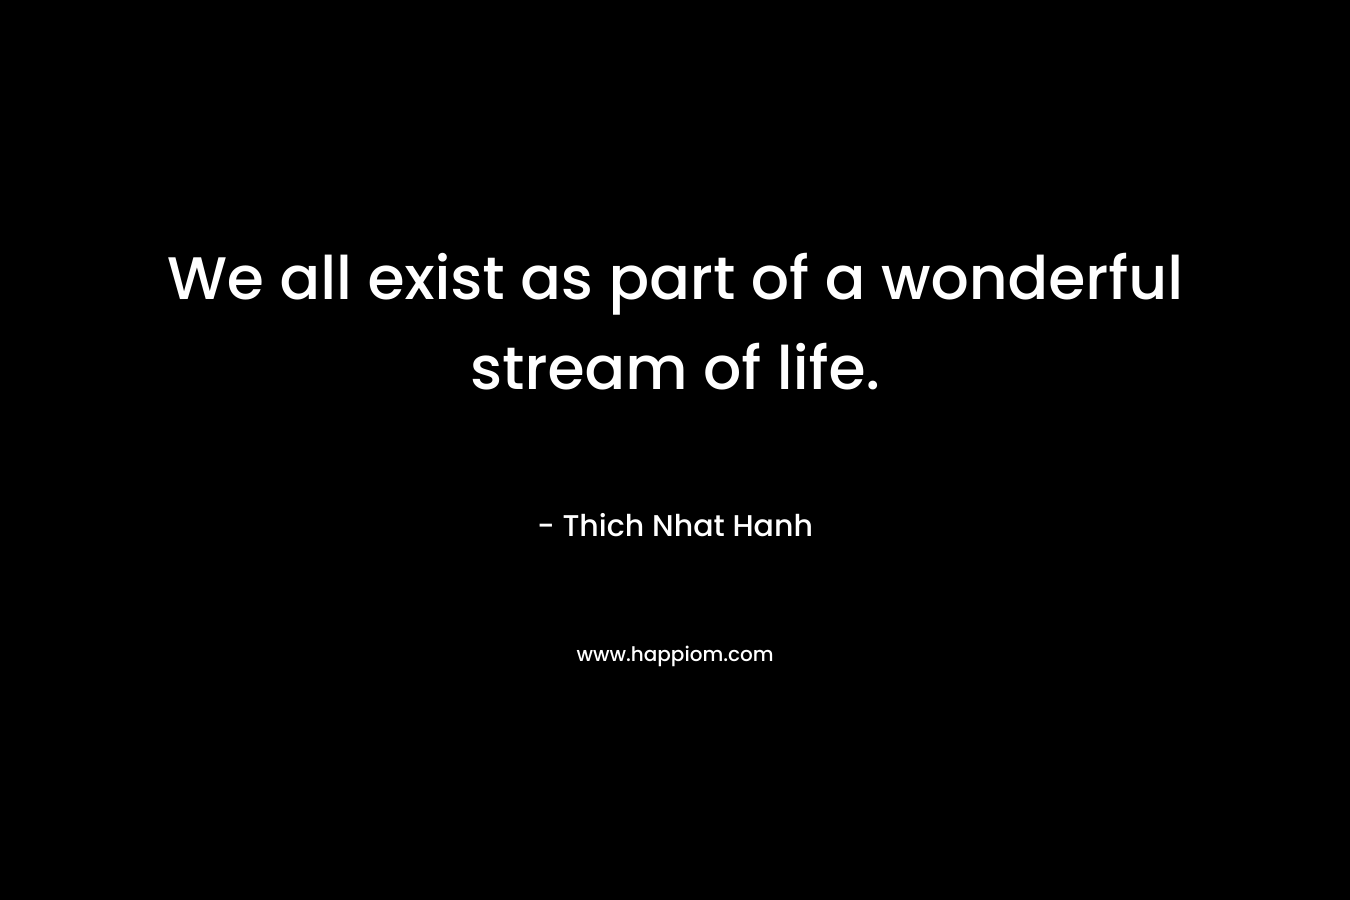 We all exist as part of a wonderful stream of life.